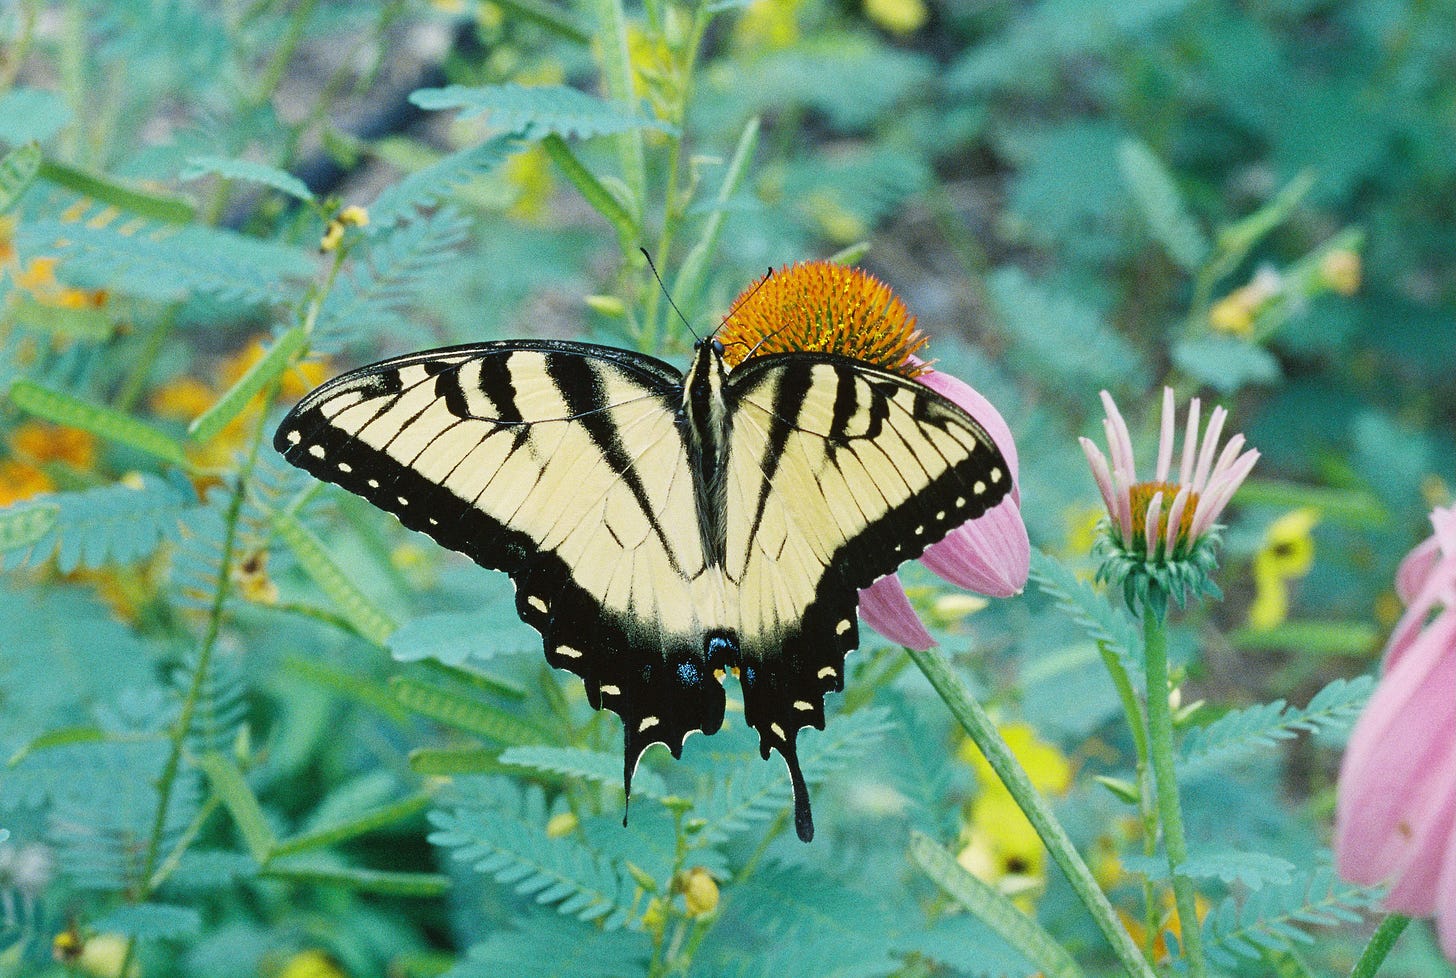 Tiger swallowtail butterfly on echinacea